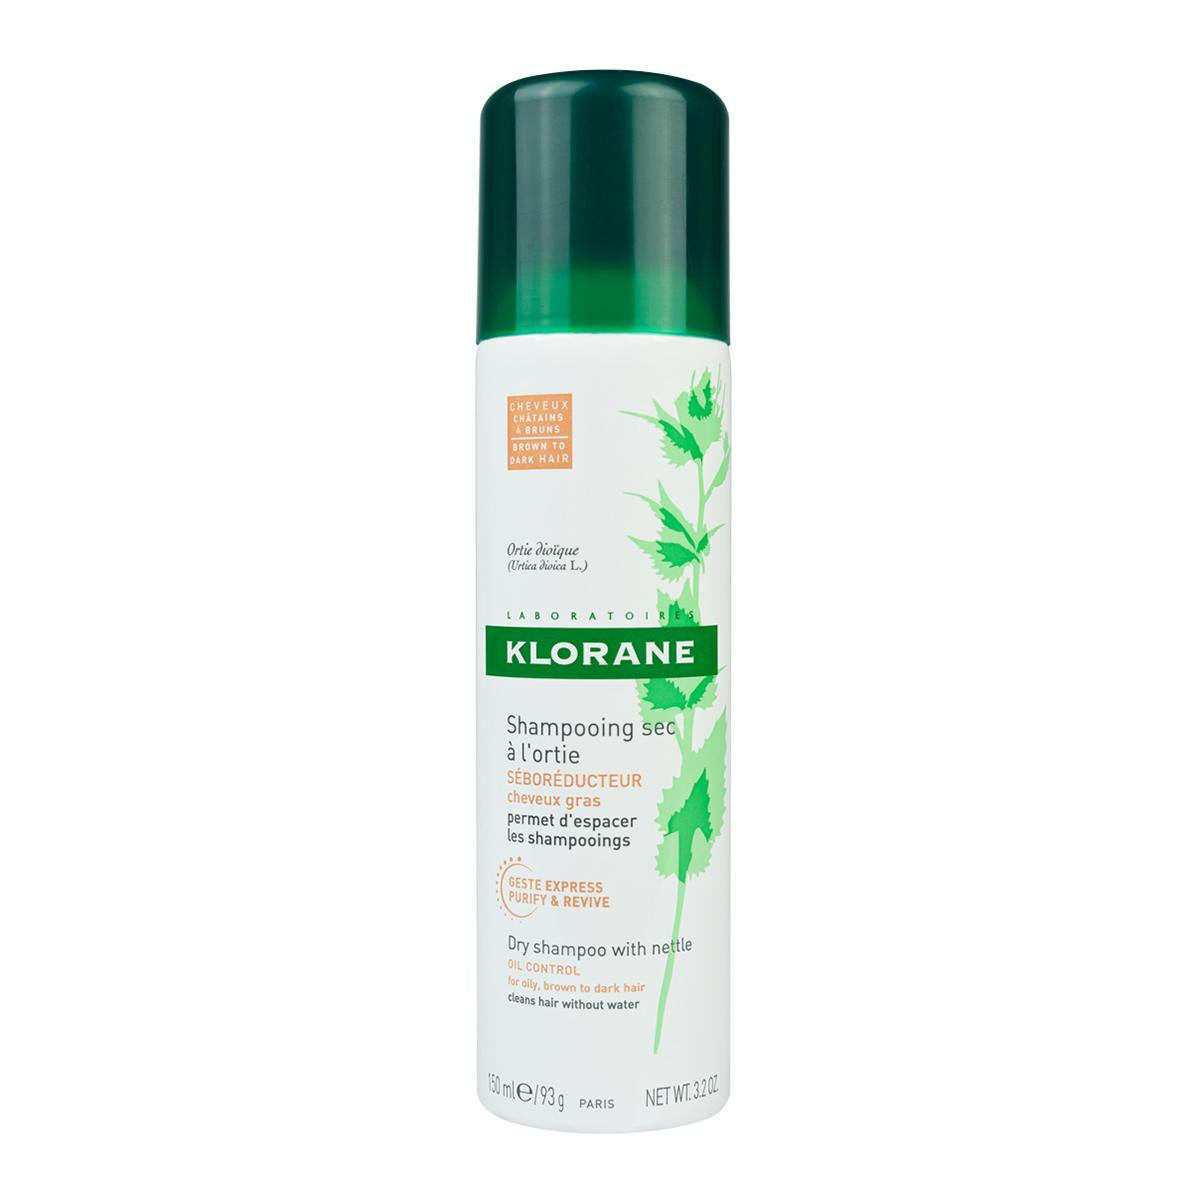 Primary image of Tinted Dry Shampoo with Nettle